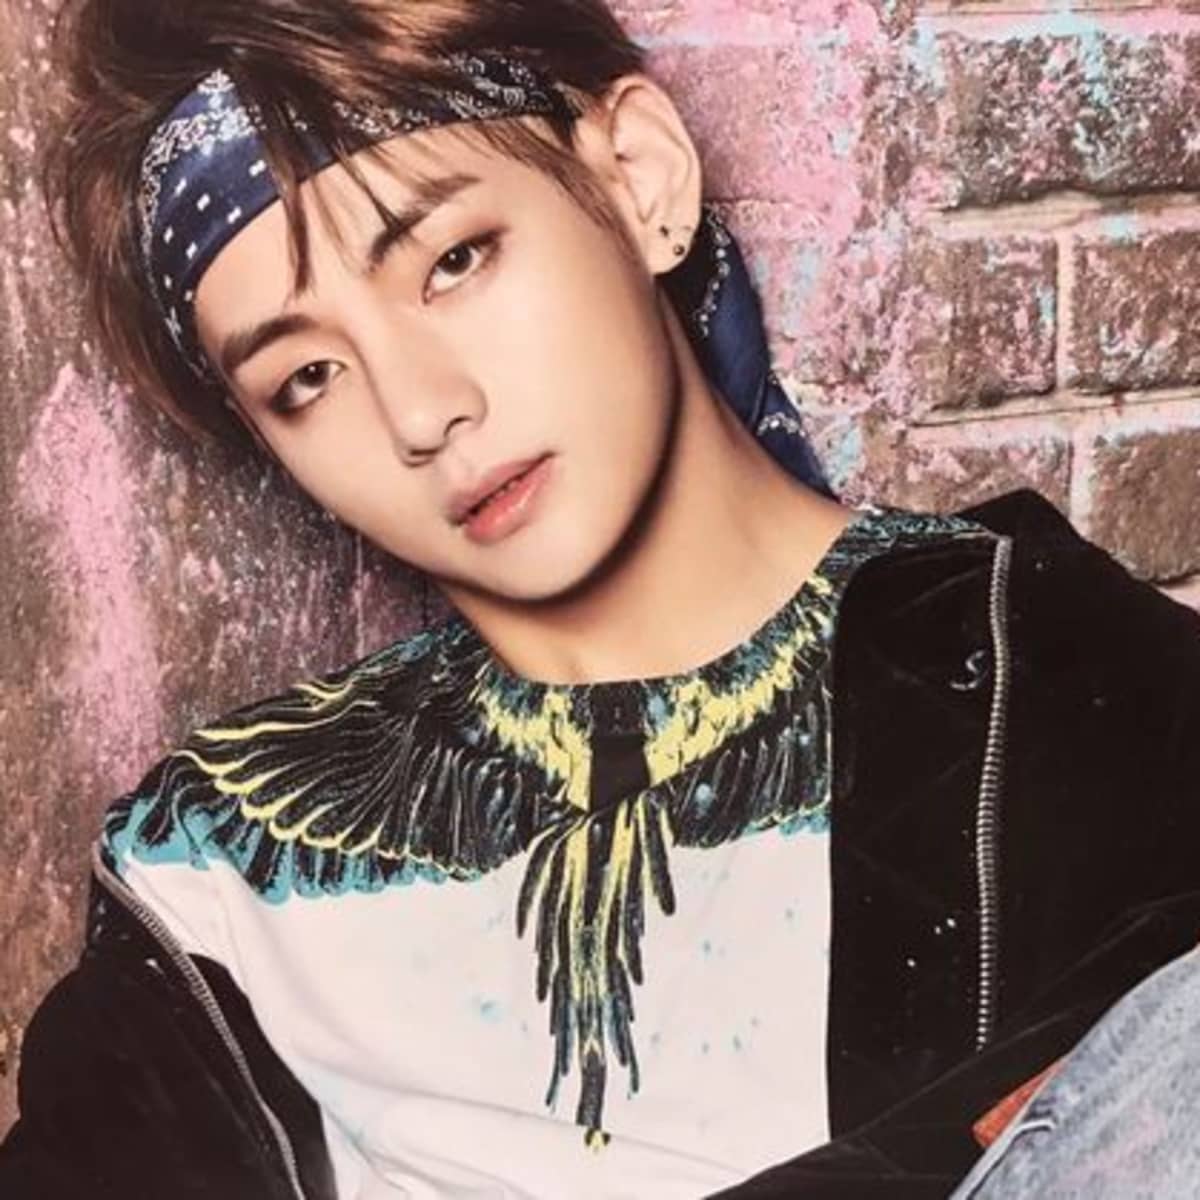 WATCH! How BTS Taehyung is The Richest Brand Ambassador in The